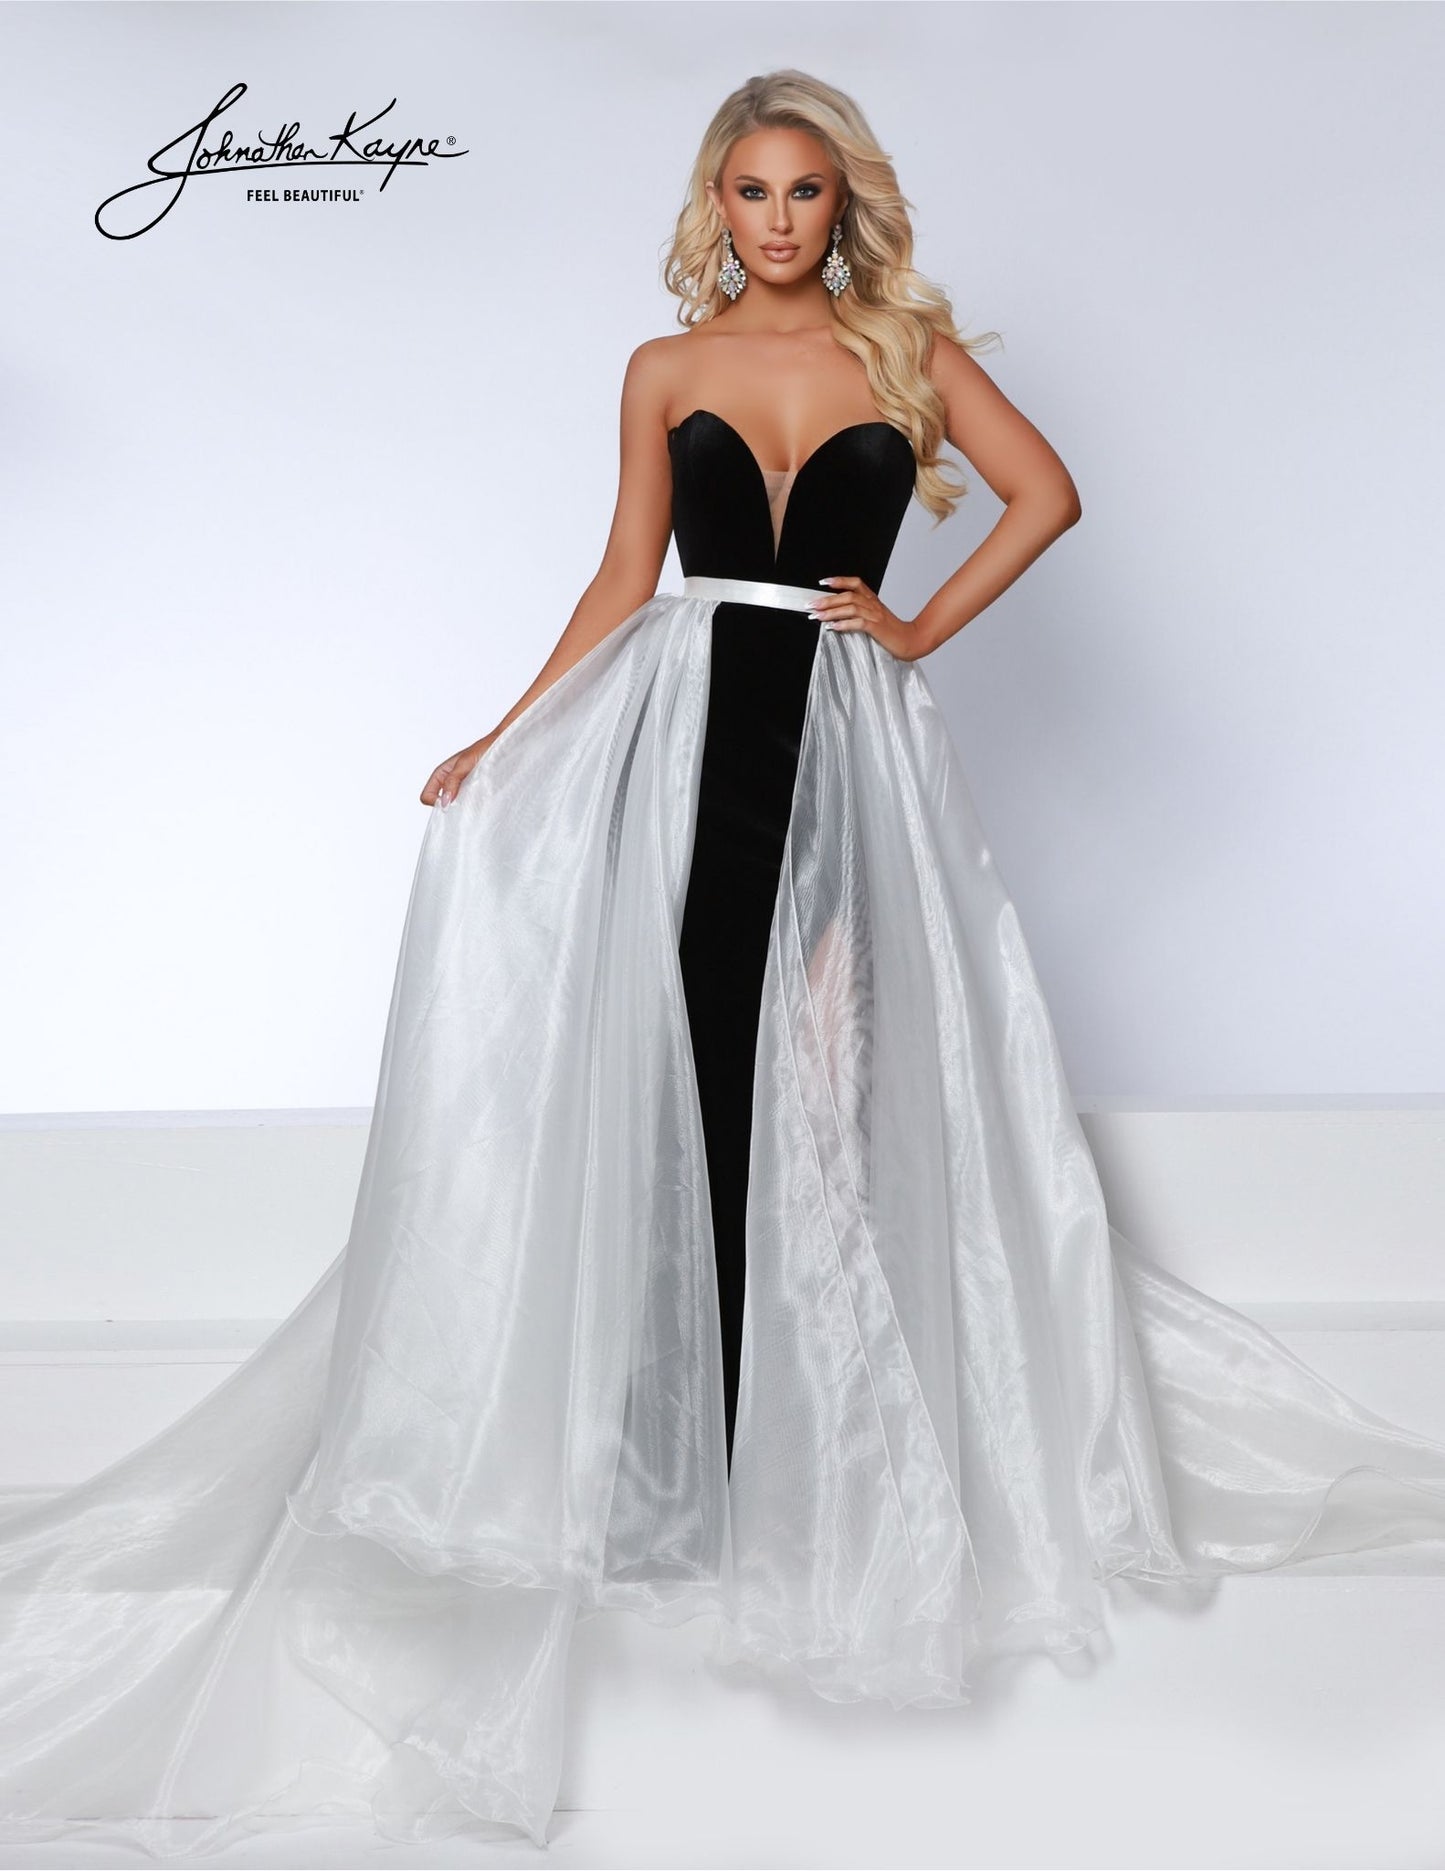 Experience the versatility of the Johnathan Kayne Detachable Overskirt. Designed with organza fabric and a wire hem, this formal wear accessory adds a touch of glamour to any pageant or special event. Transform your look with the detachable feature and elevate your style game. A true wardrobe essential, this poly organza overskirt allows you to personalize your look for various occasions. Whether paired with a gown, a cocktail dress, or even a casual ensemble, it adds an instant dose of elegance and flair.